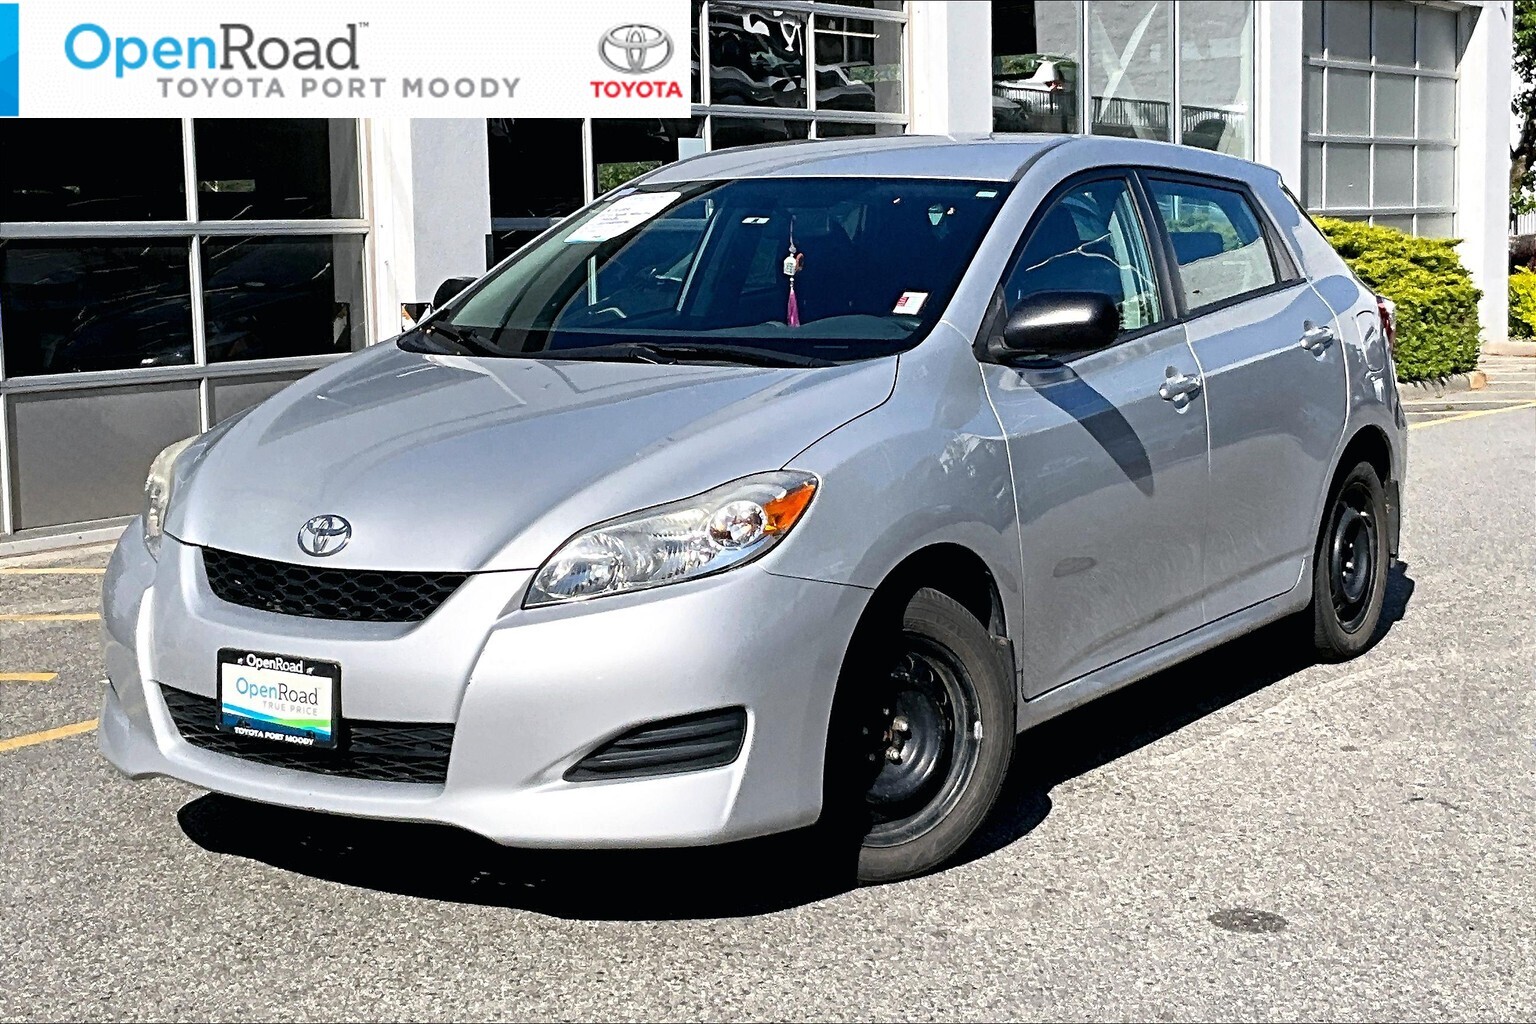 2013 Toyota Matrix FWD 4A |OpenRoad True Price |Local One Owner |No C